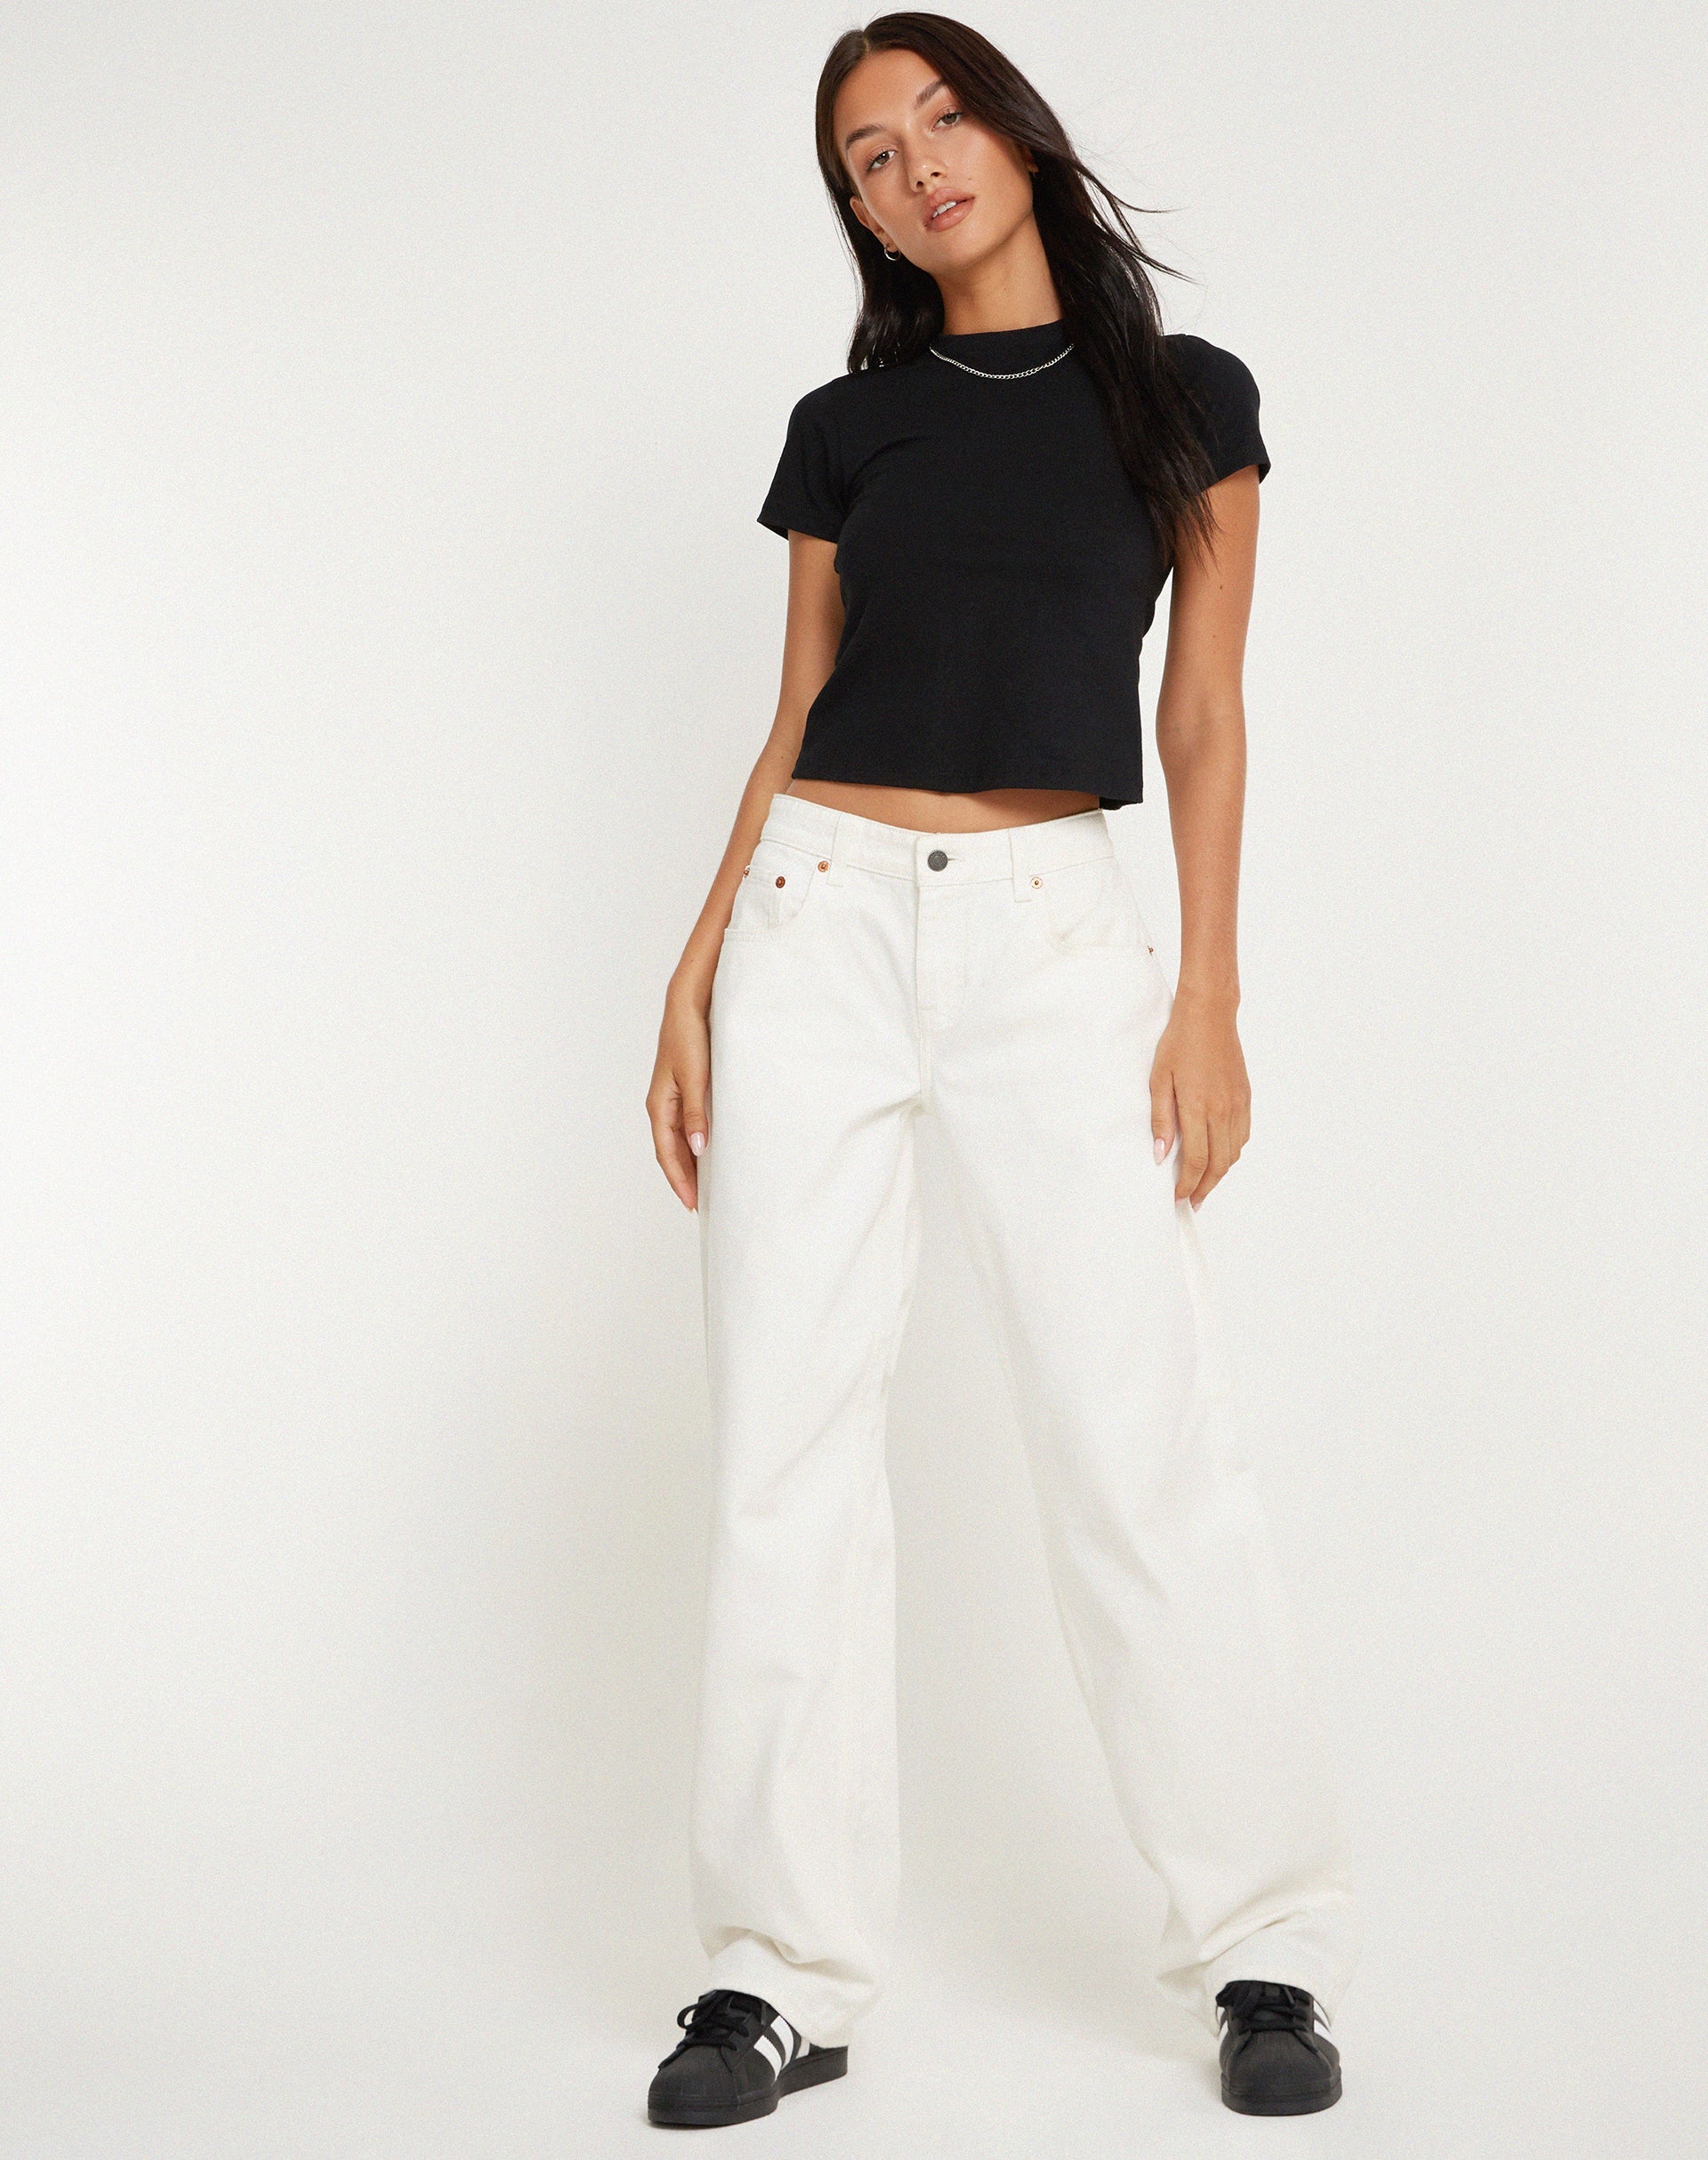 image of MOTEL X BARBARA Low Rise Parallel Jeans in True White